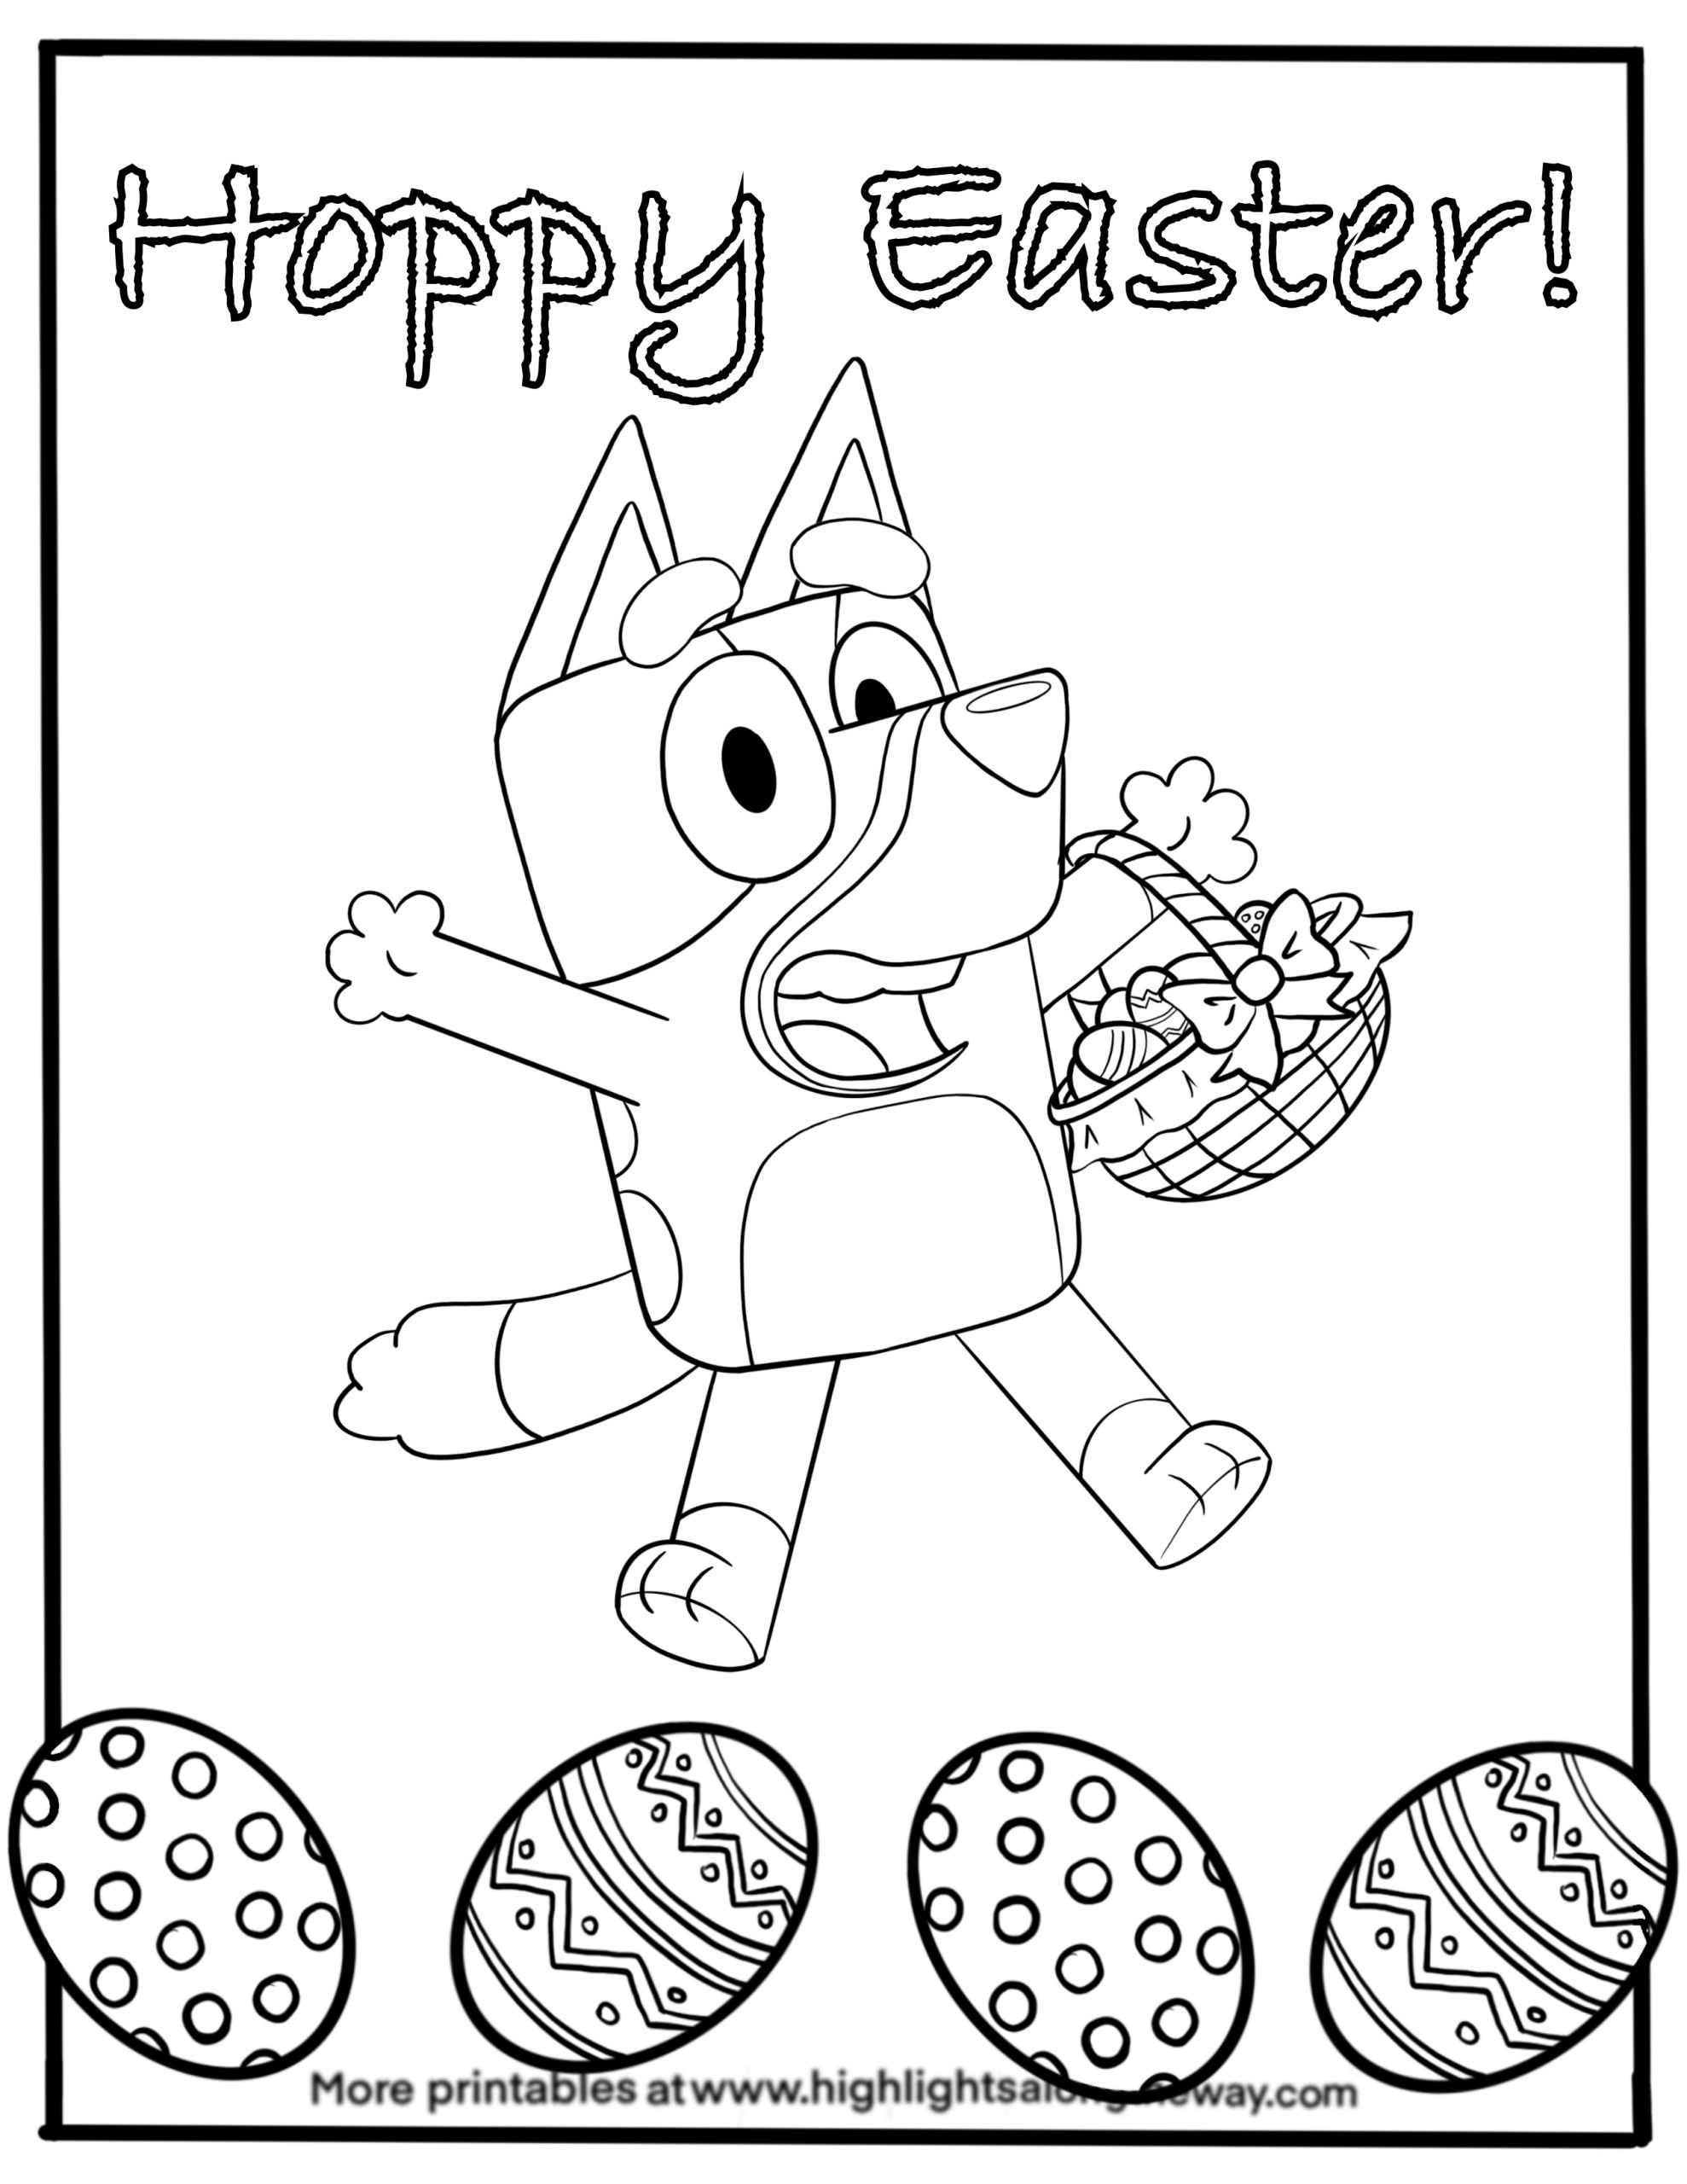 bluey-easter-coloring-page